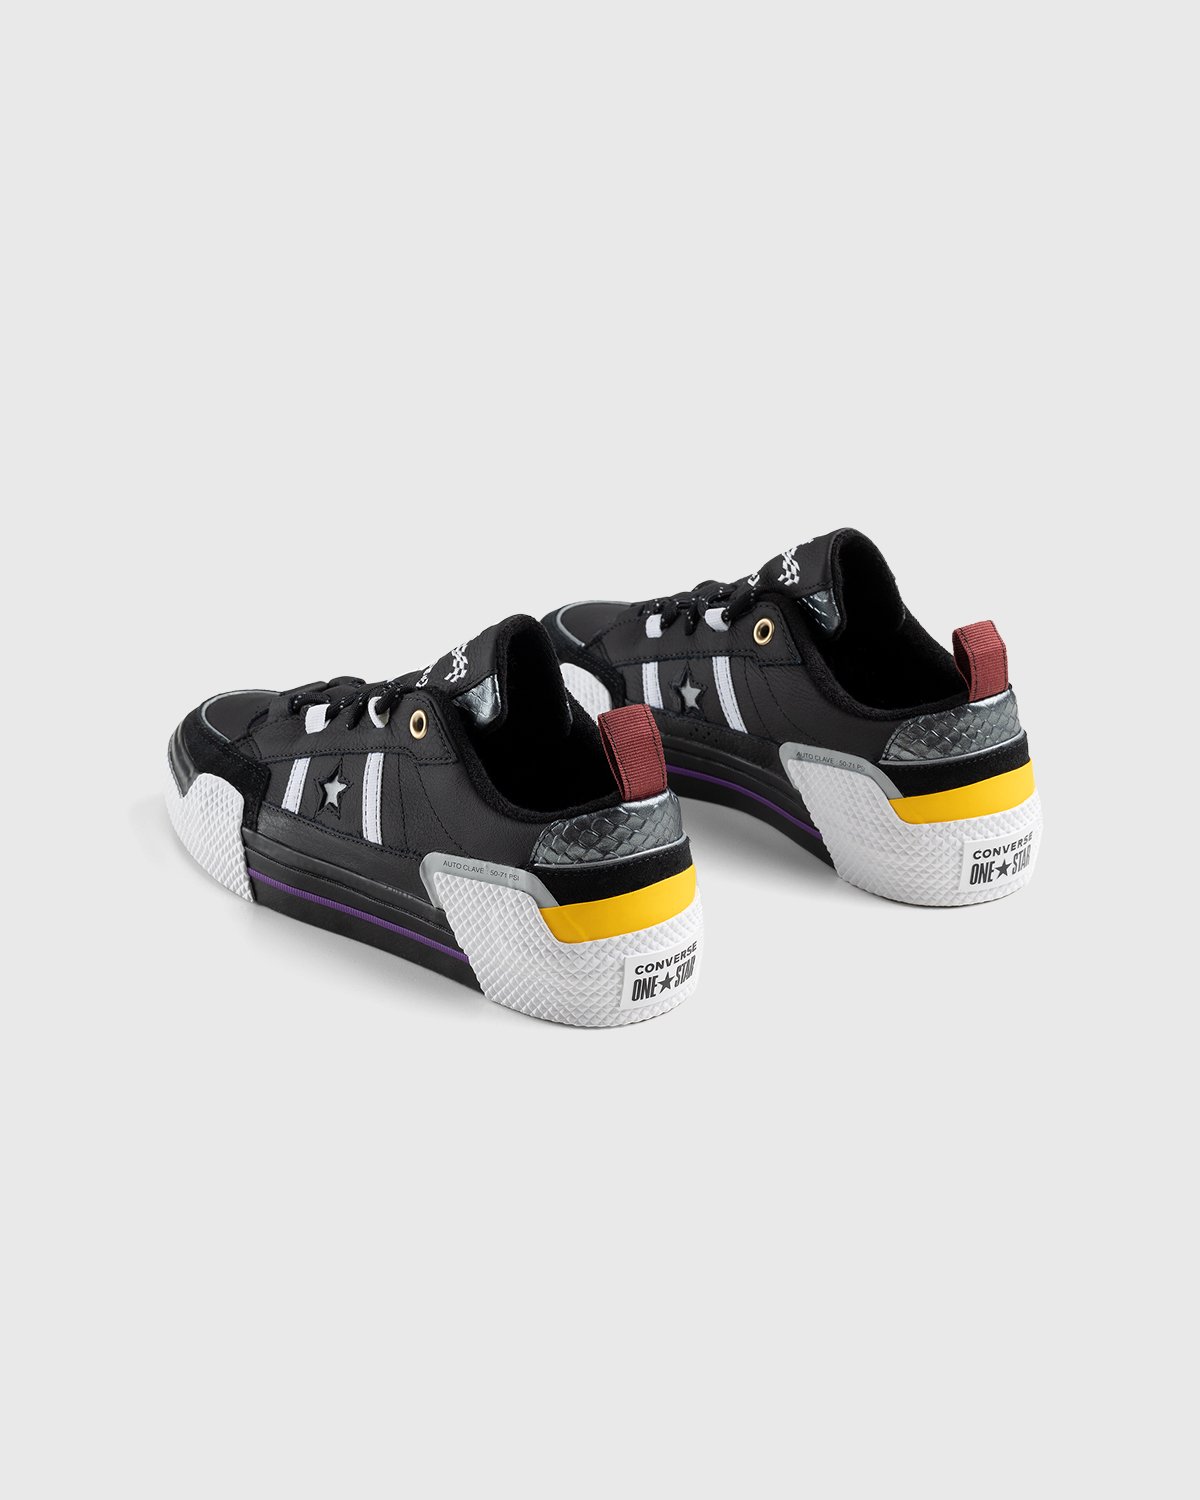 Converse x IBN Japser - One Star Ox Black/White/Spectra Yellow - Footwear - Black - Image 3